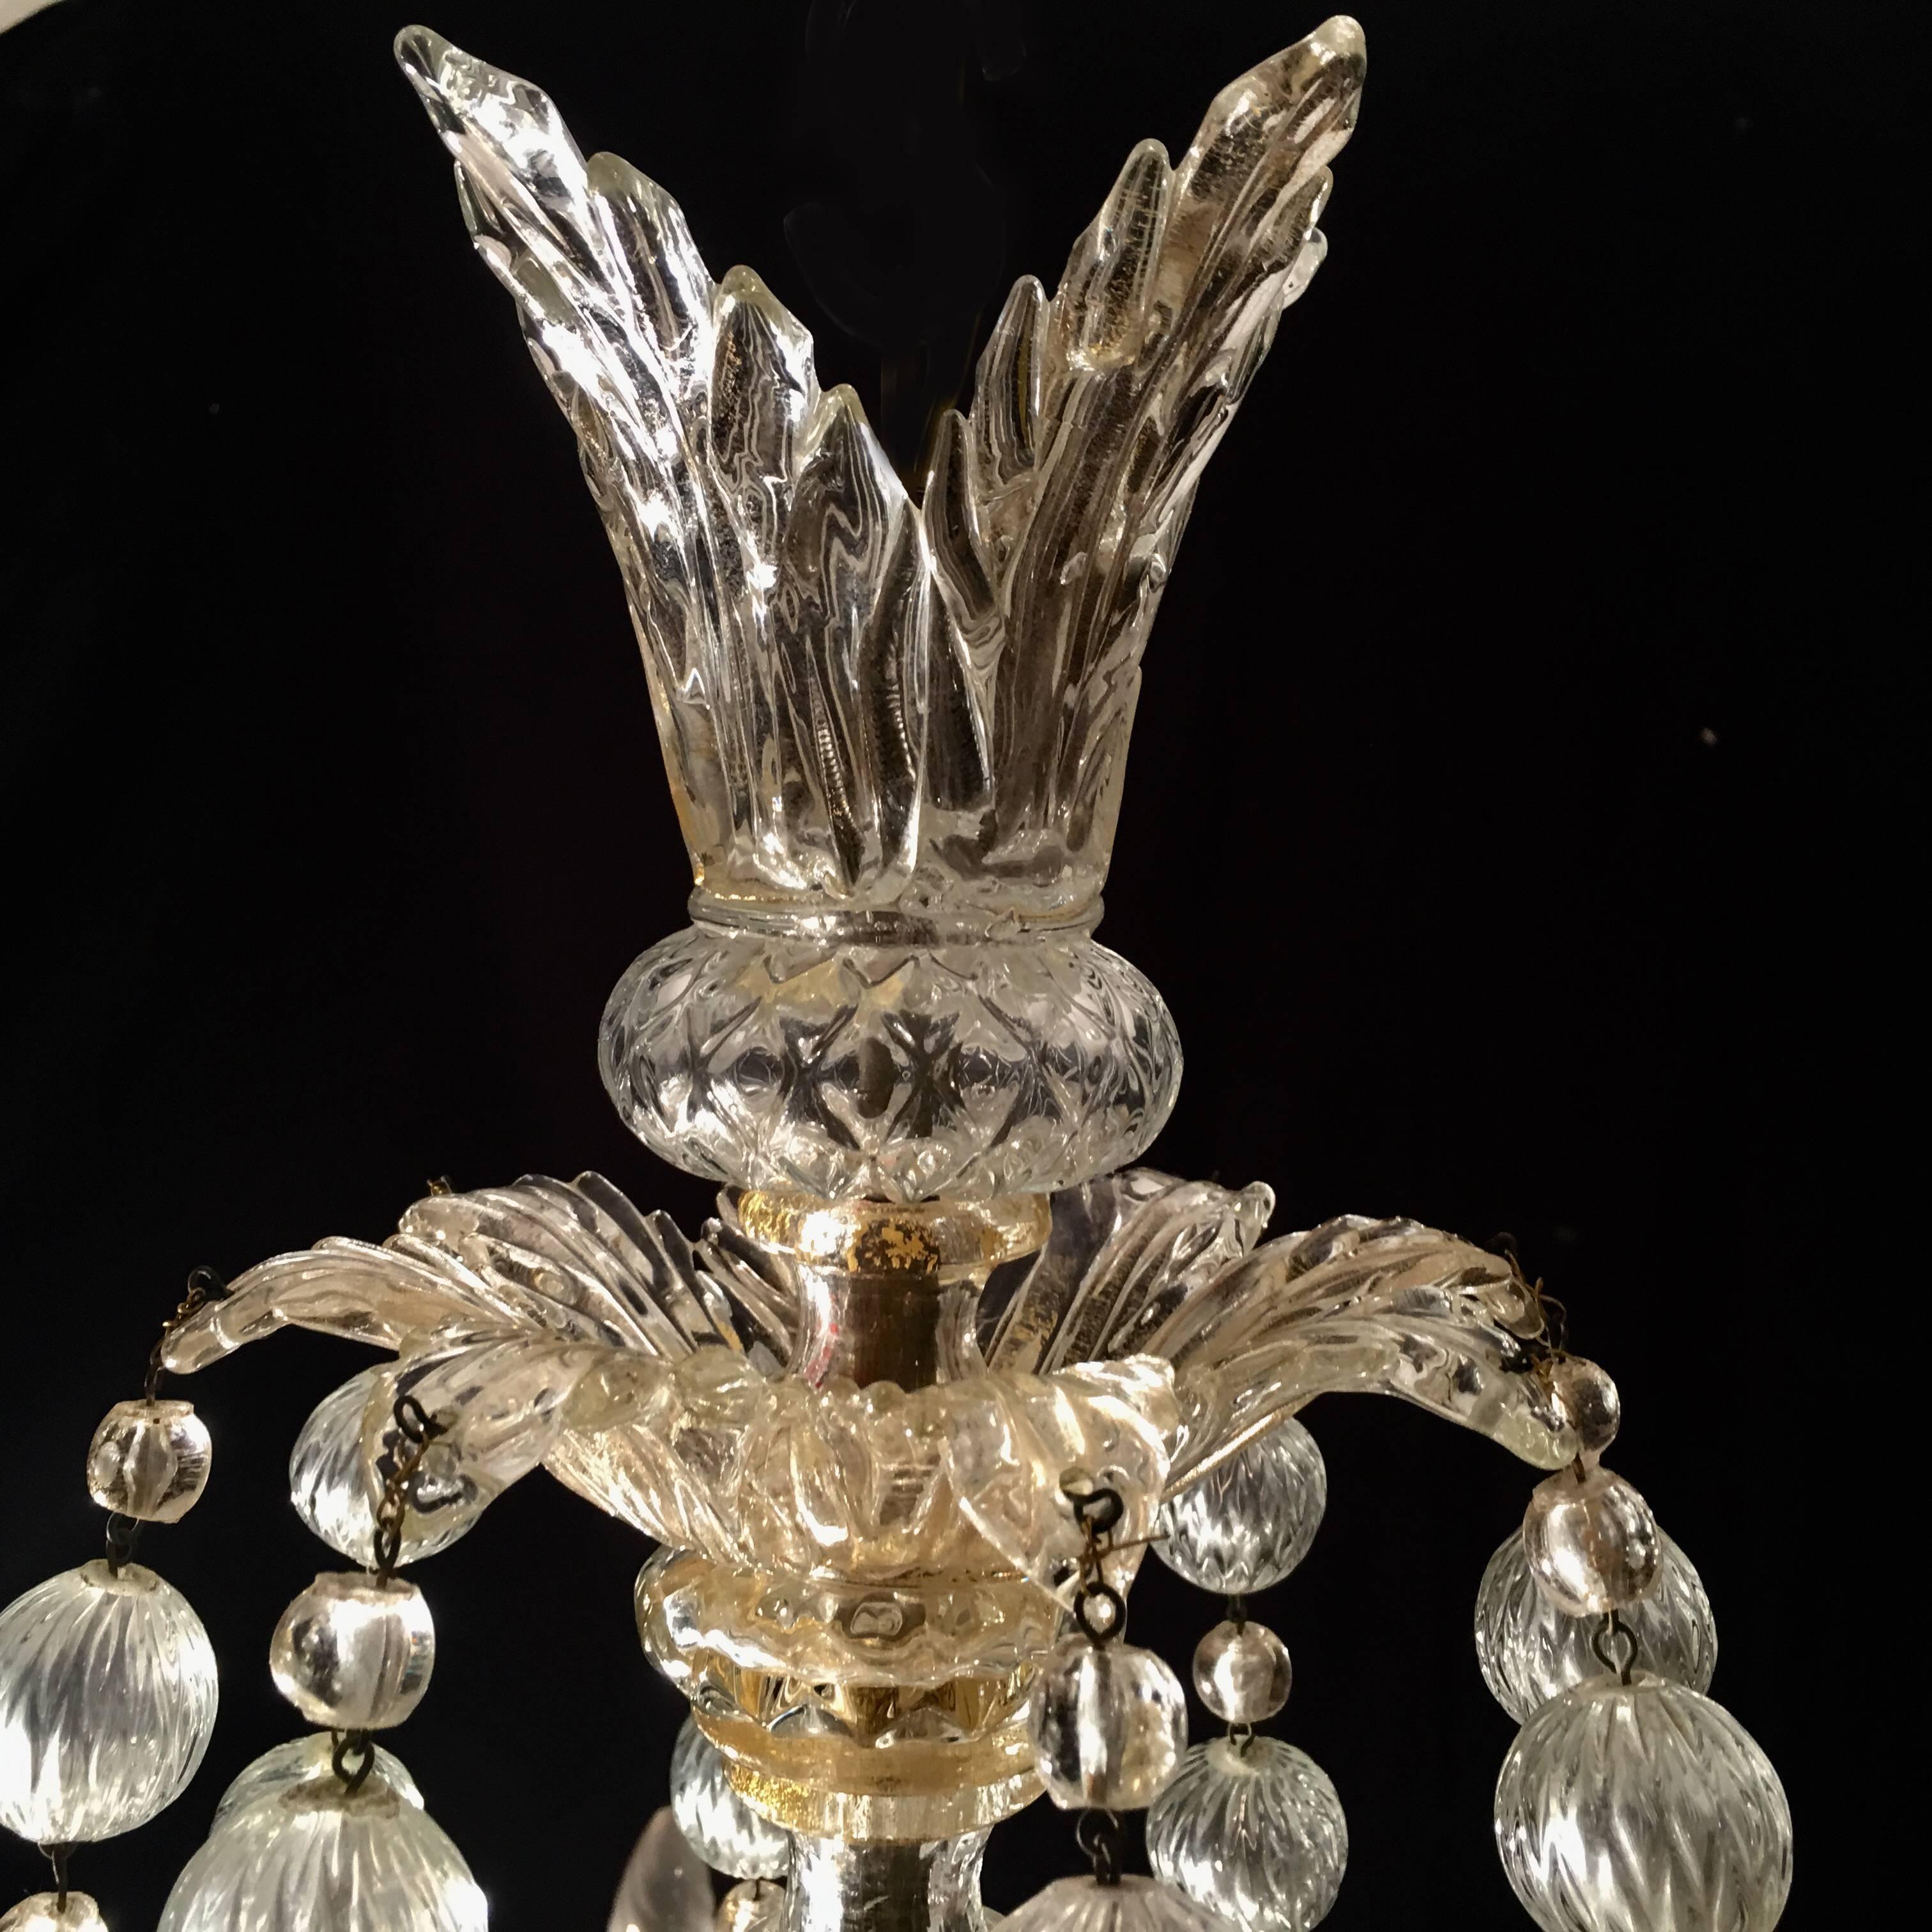 Magnificent chandelier with eight arms with details gold inclusions. Eight heads of lions are the eight ball falls background. The chandelier comes from the private collection of Baron Von Plant in Catania Sicily.
        